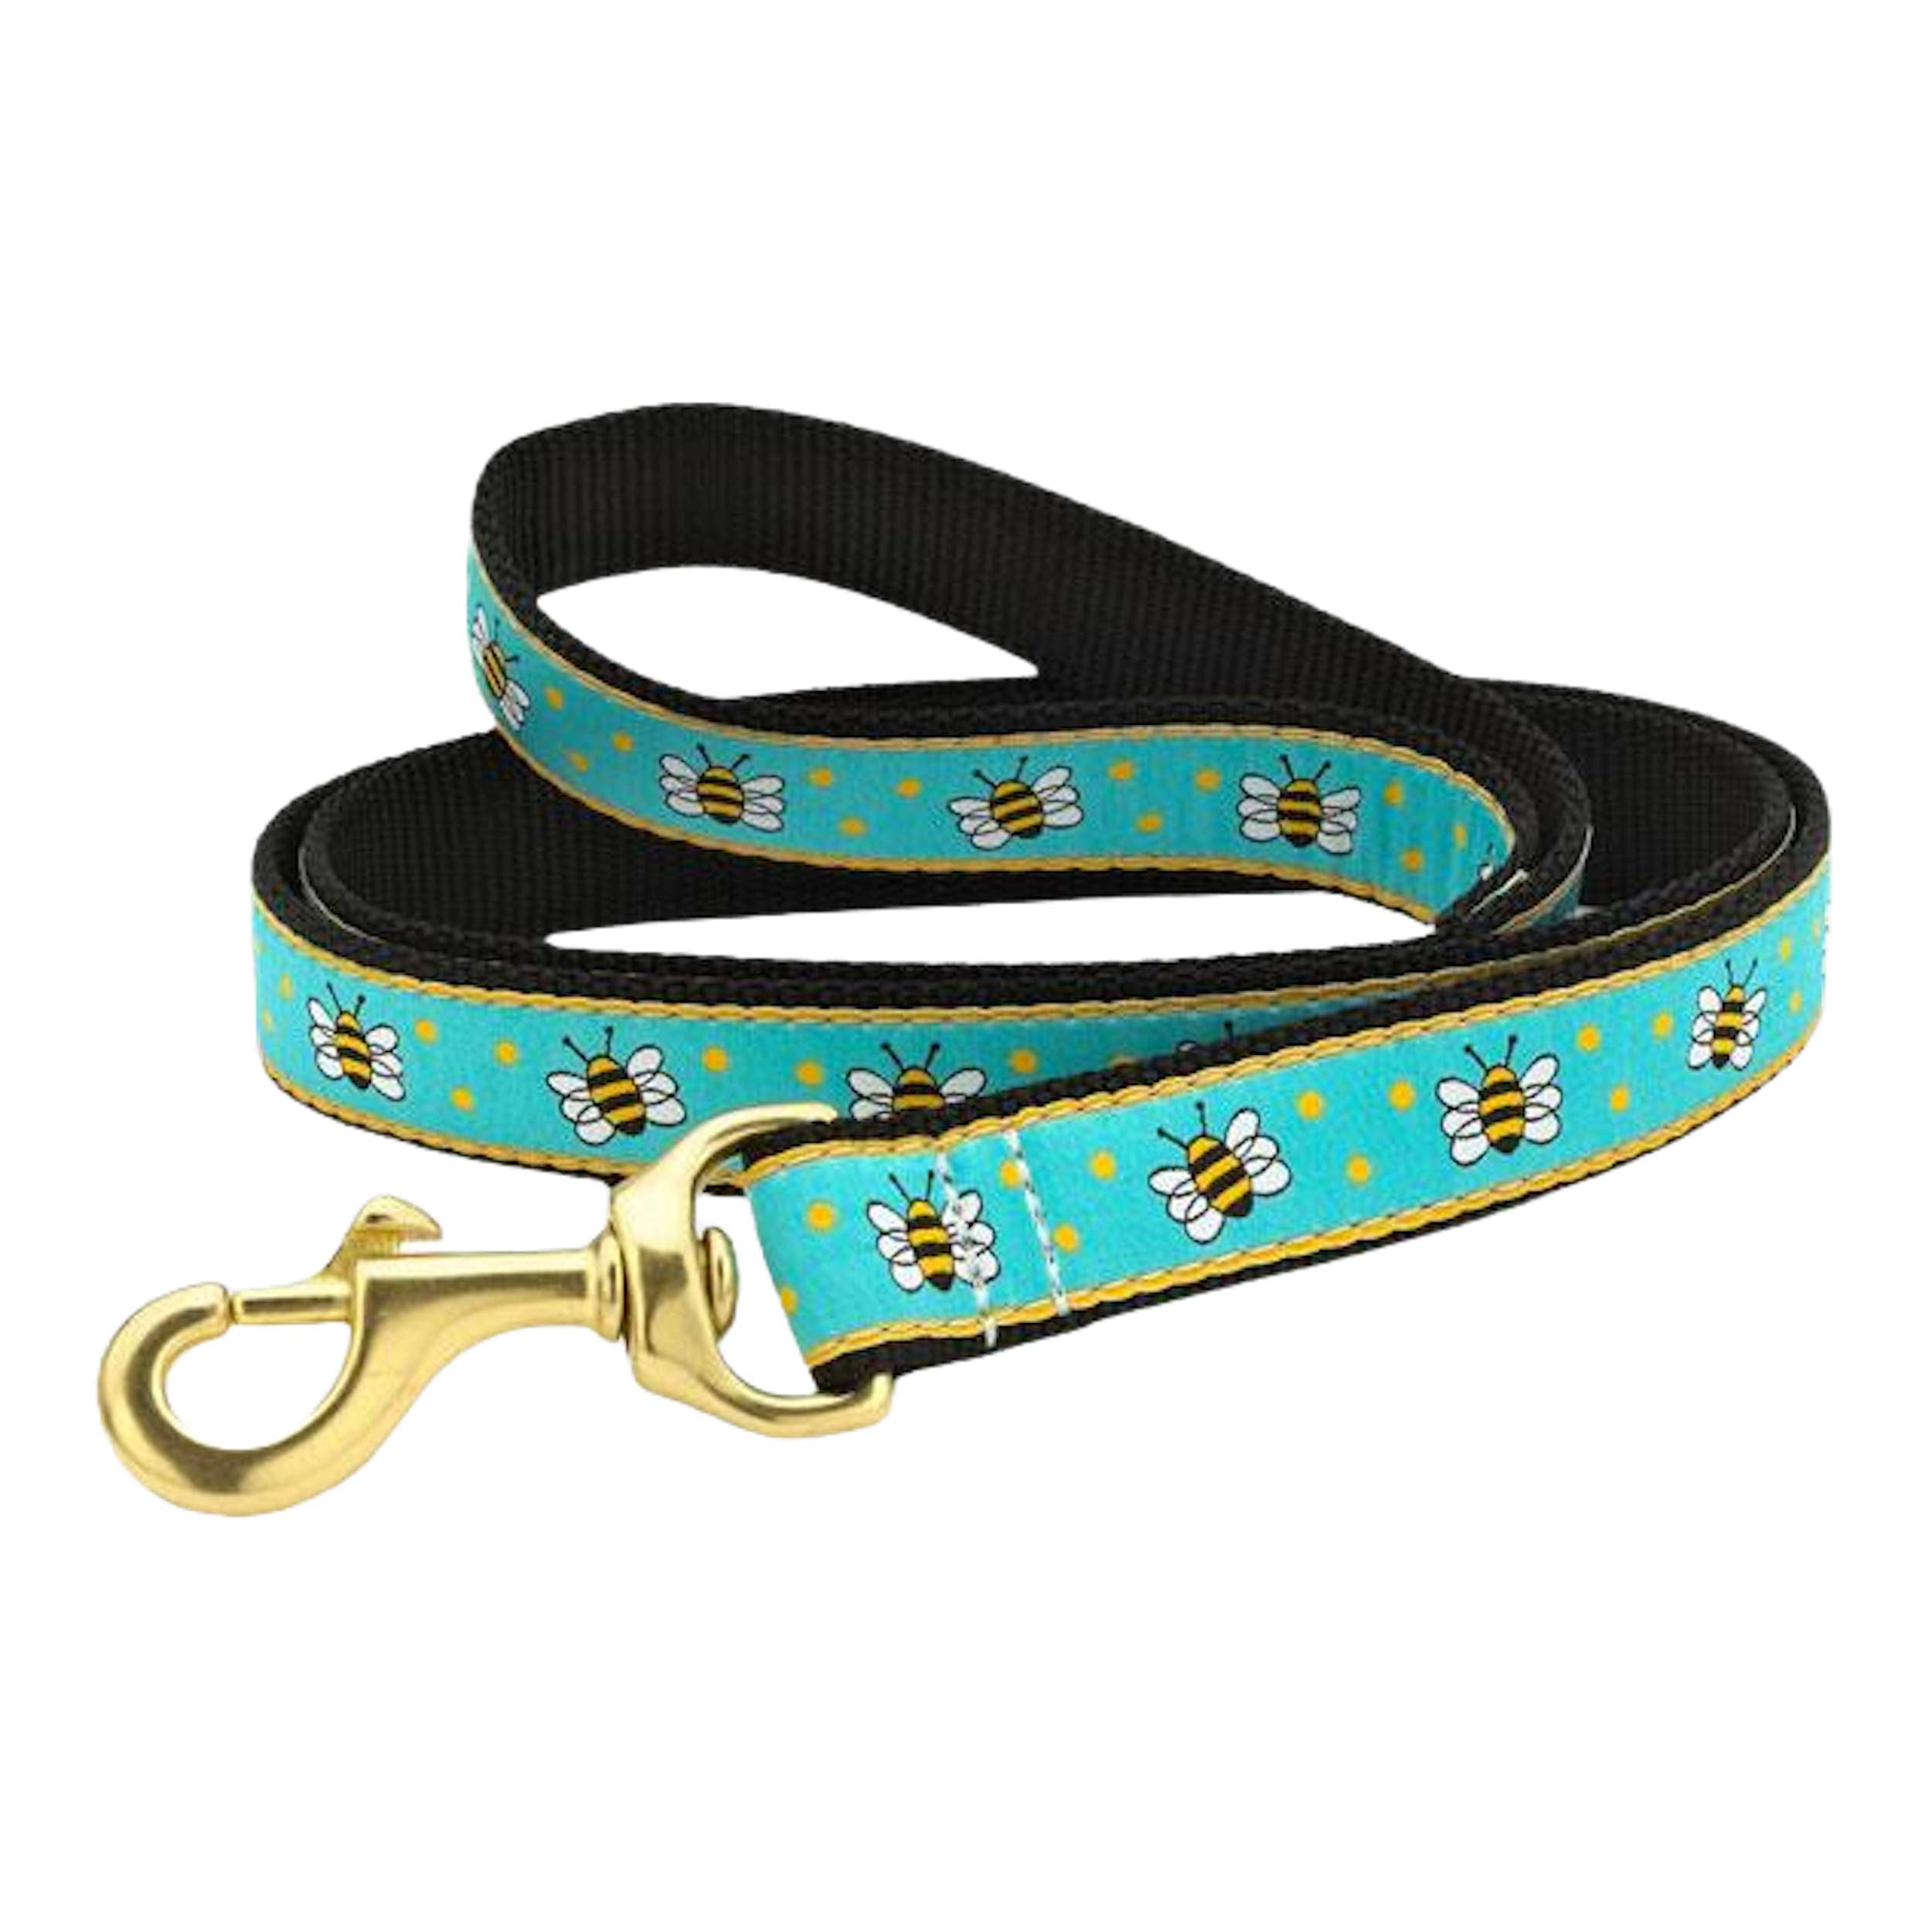 BUMBLE-BEES-DOG-LEASH